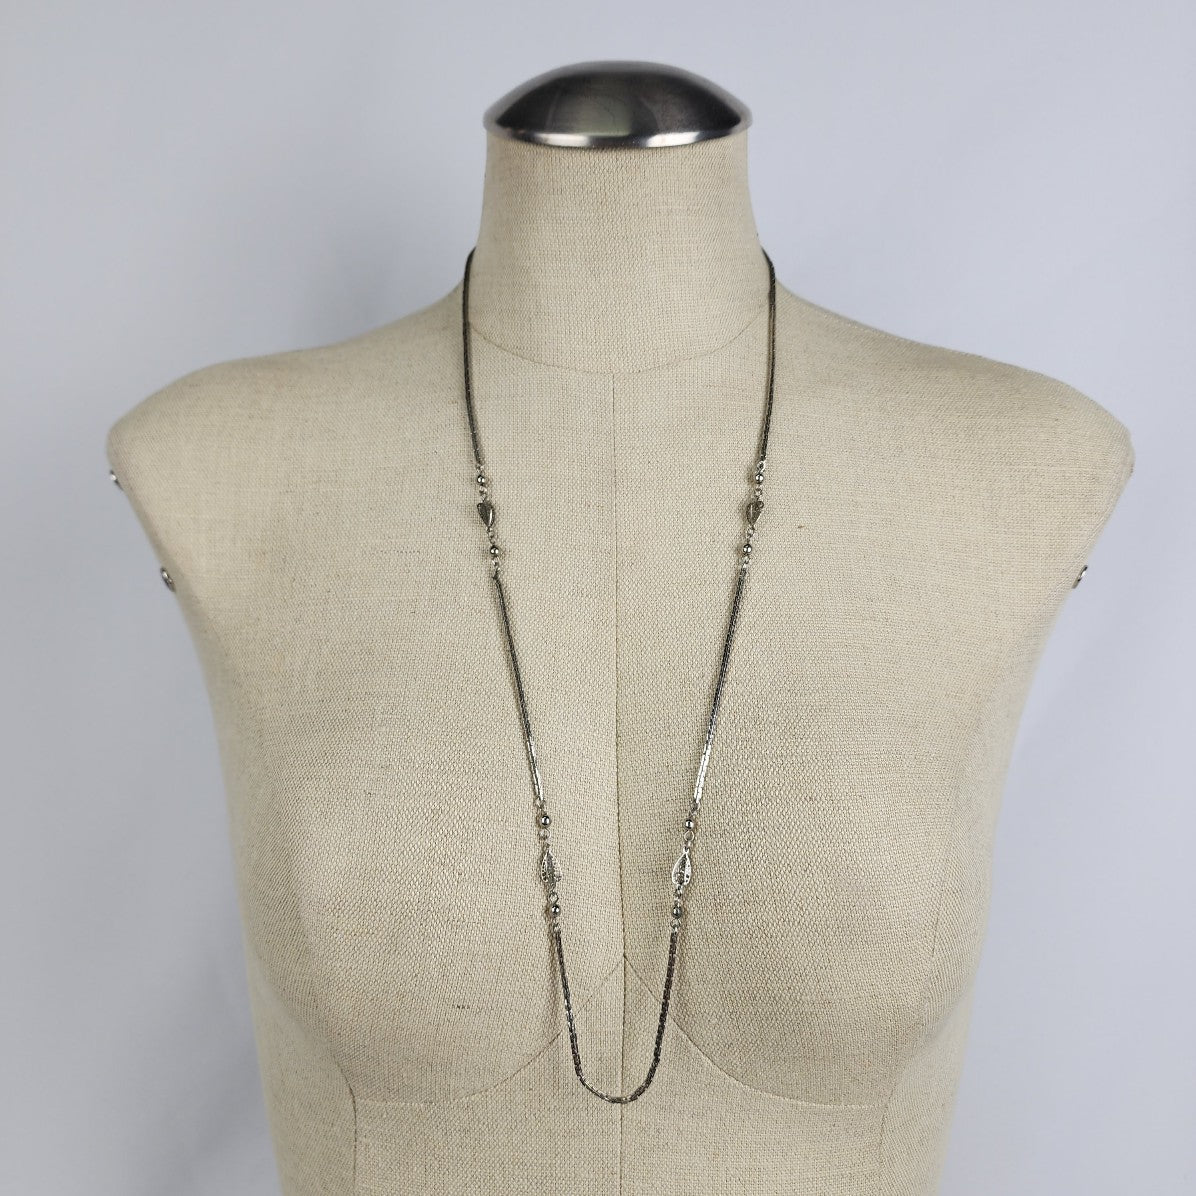 Vintage Silver Tone Chain Link Necklace